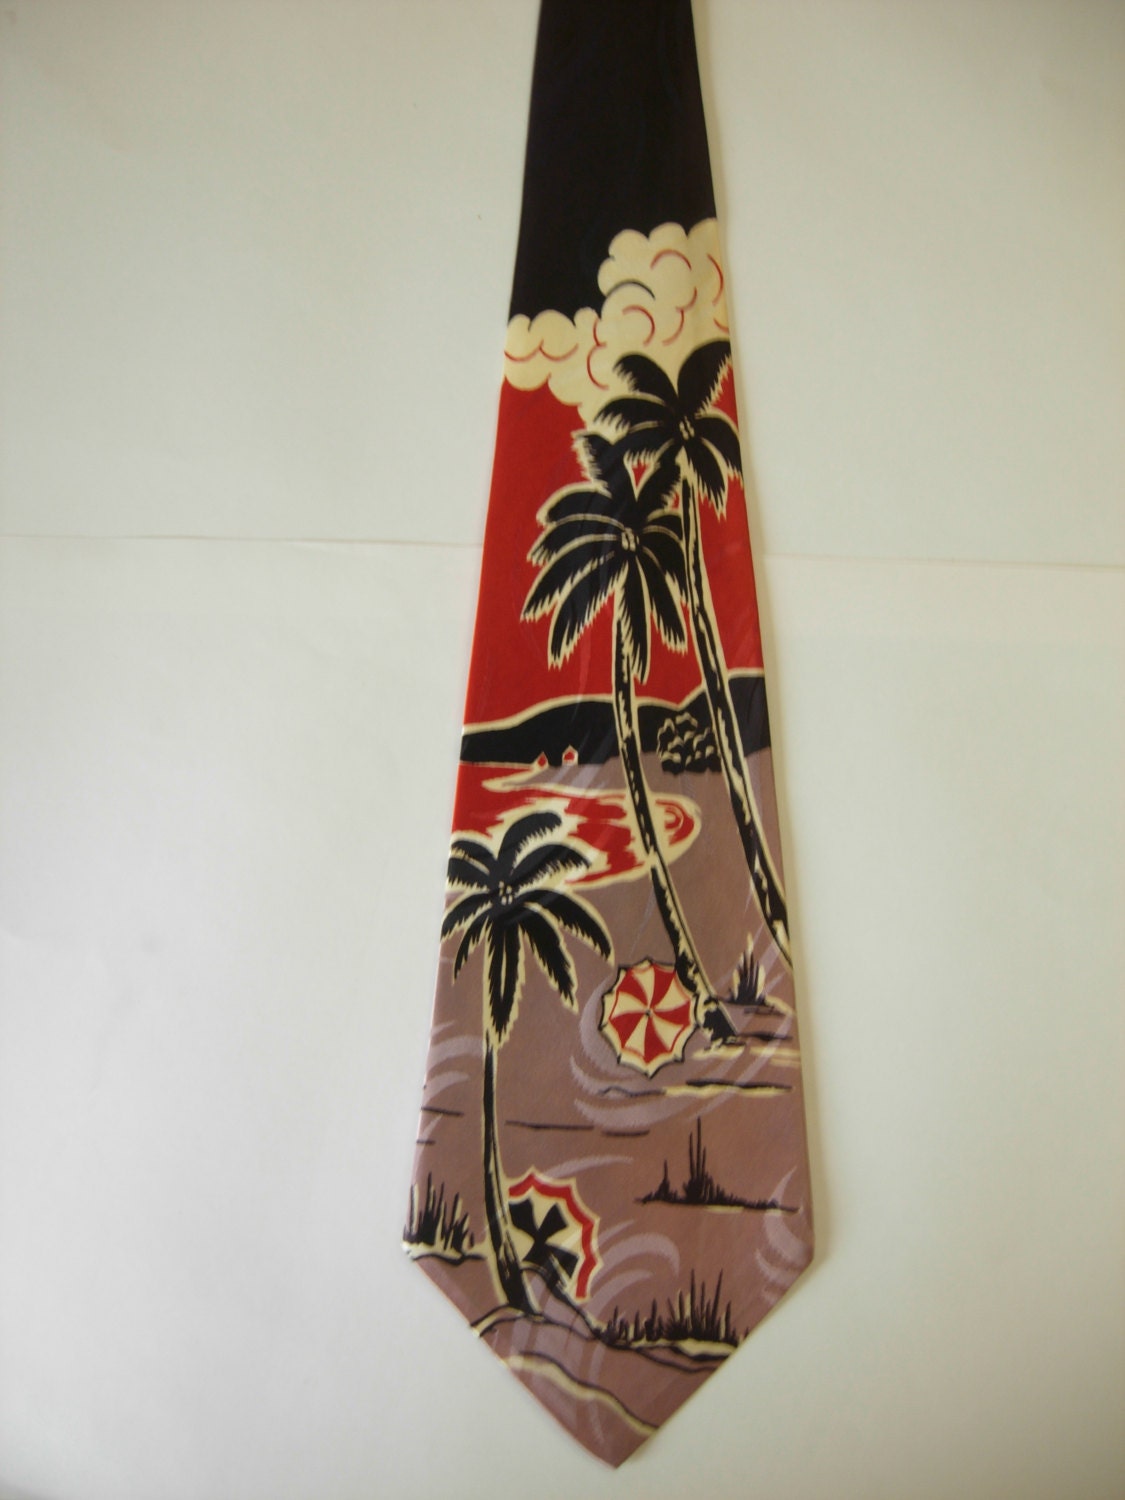 Incredible 1940s Swing Tie with Palm Trees and Beach